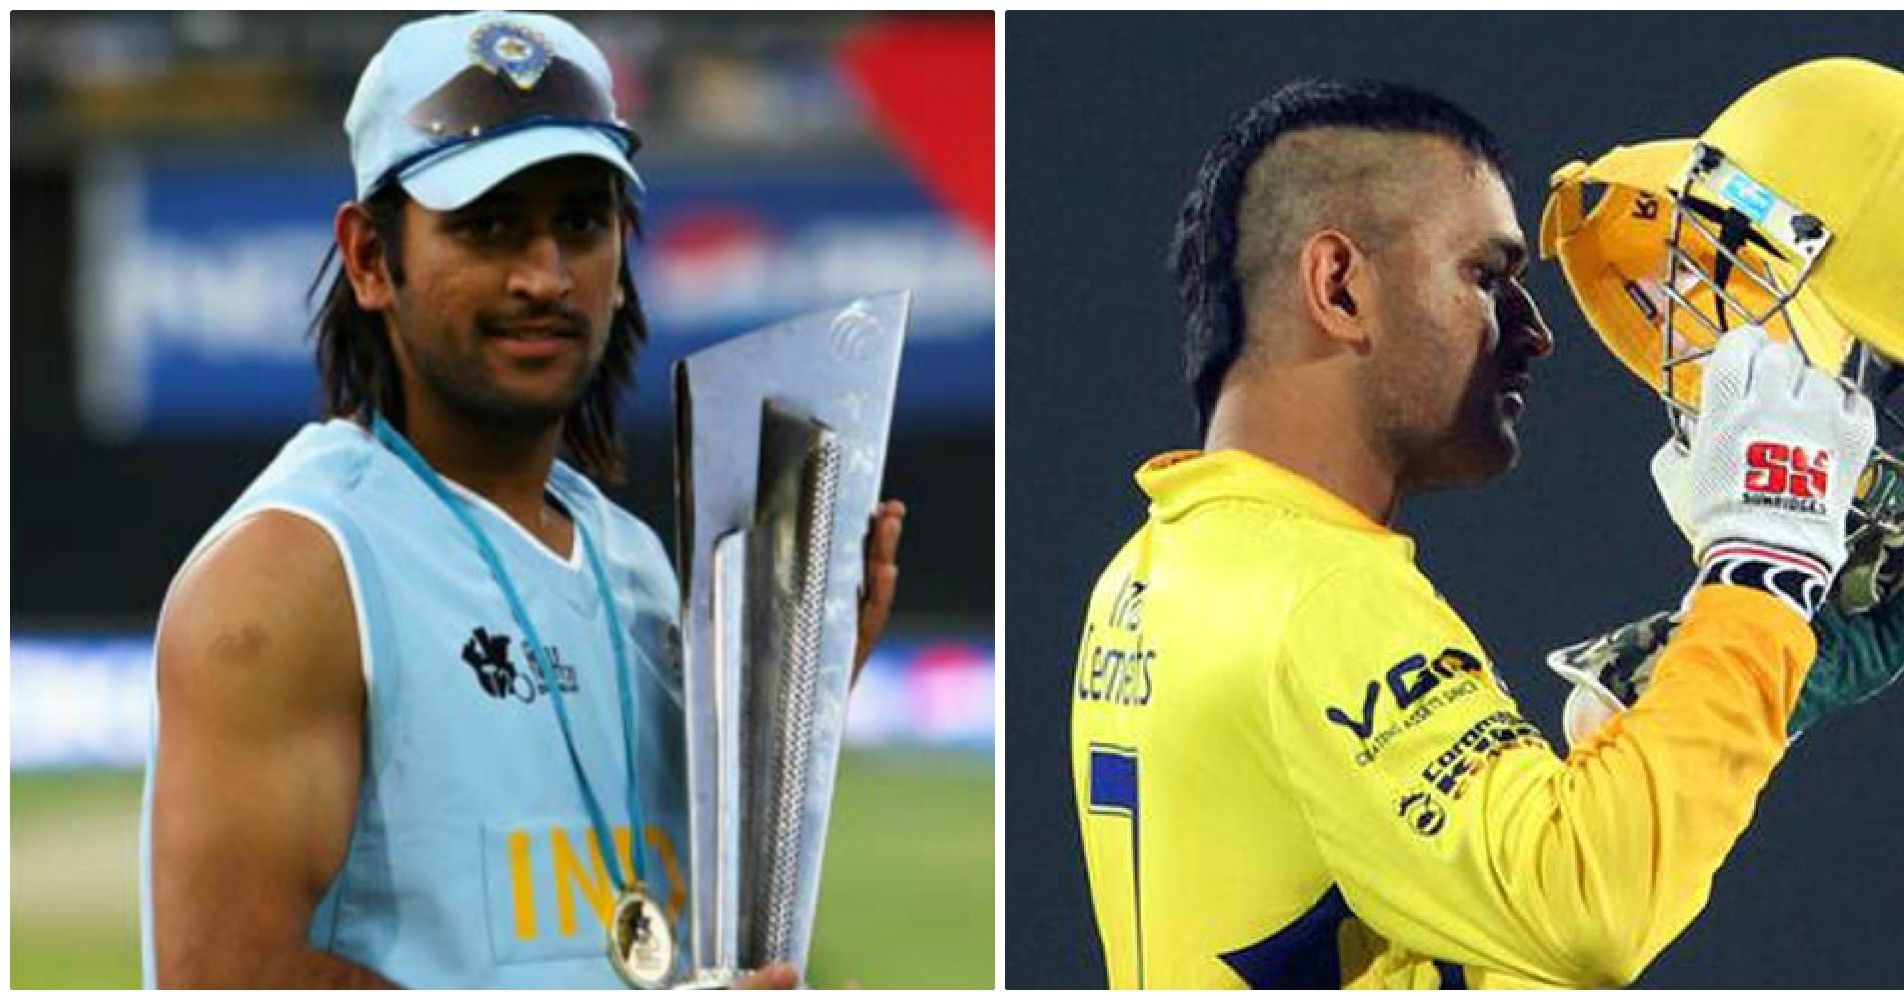 A Look At How Ms Dhoni S Fortunes And Hairstyles Changed During The Course Of His Career Hair comb hair cut machine baby hair brush and comb hair straightener comb sheep hair cut machine hair cutting scissors disposable hair cutting capes custom ··· hair stylists professional styling comb ps material salon cutting comb. hairstyles changed during the course